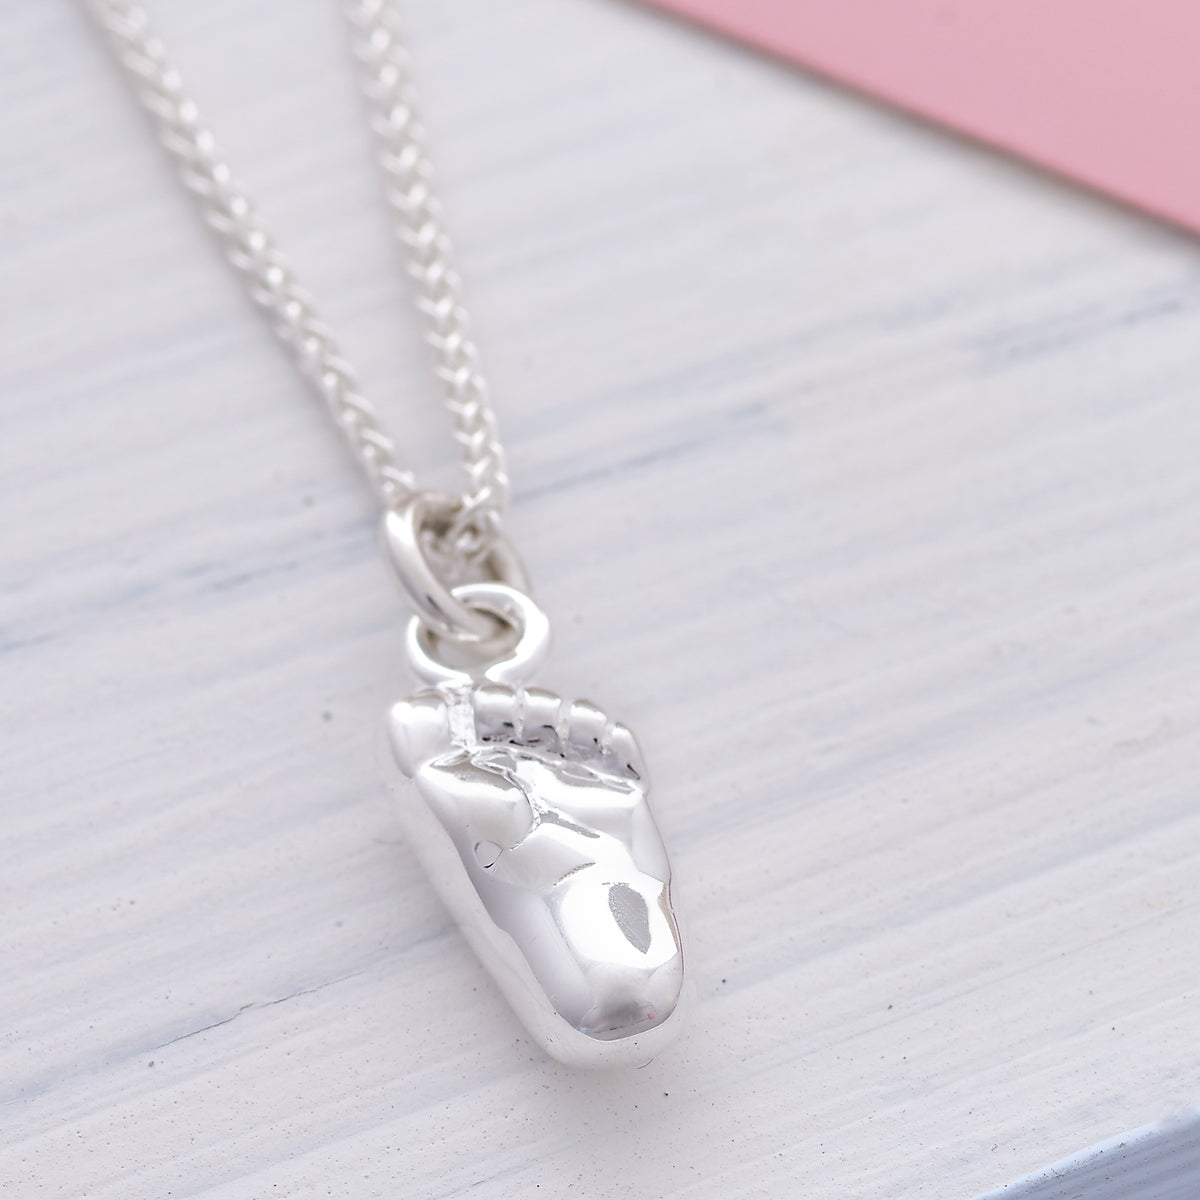 Finished Necklace Option - New Baby Silver Charm